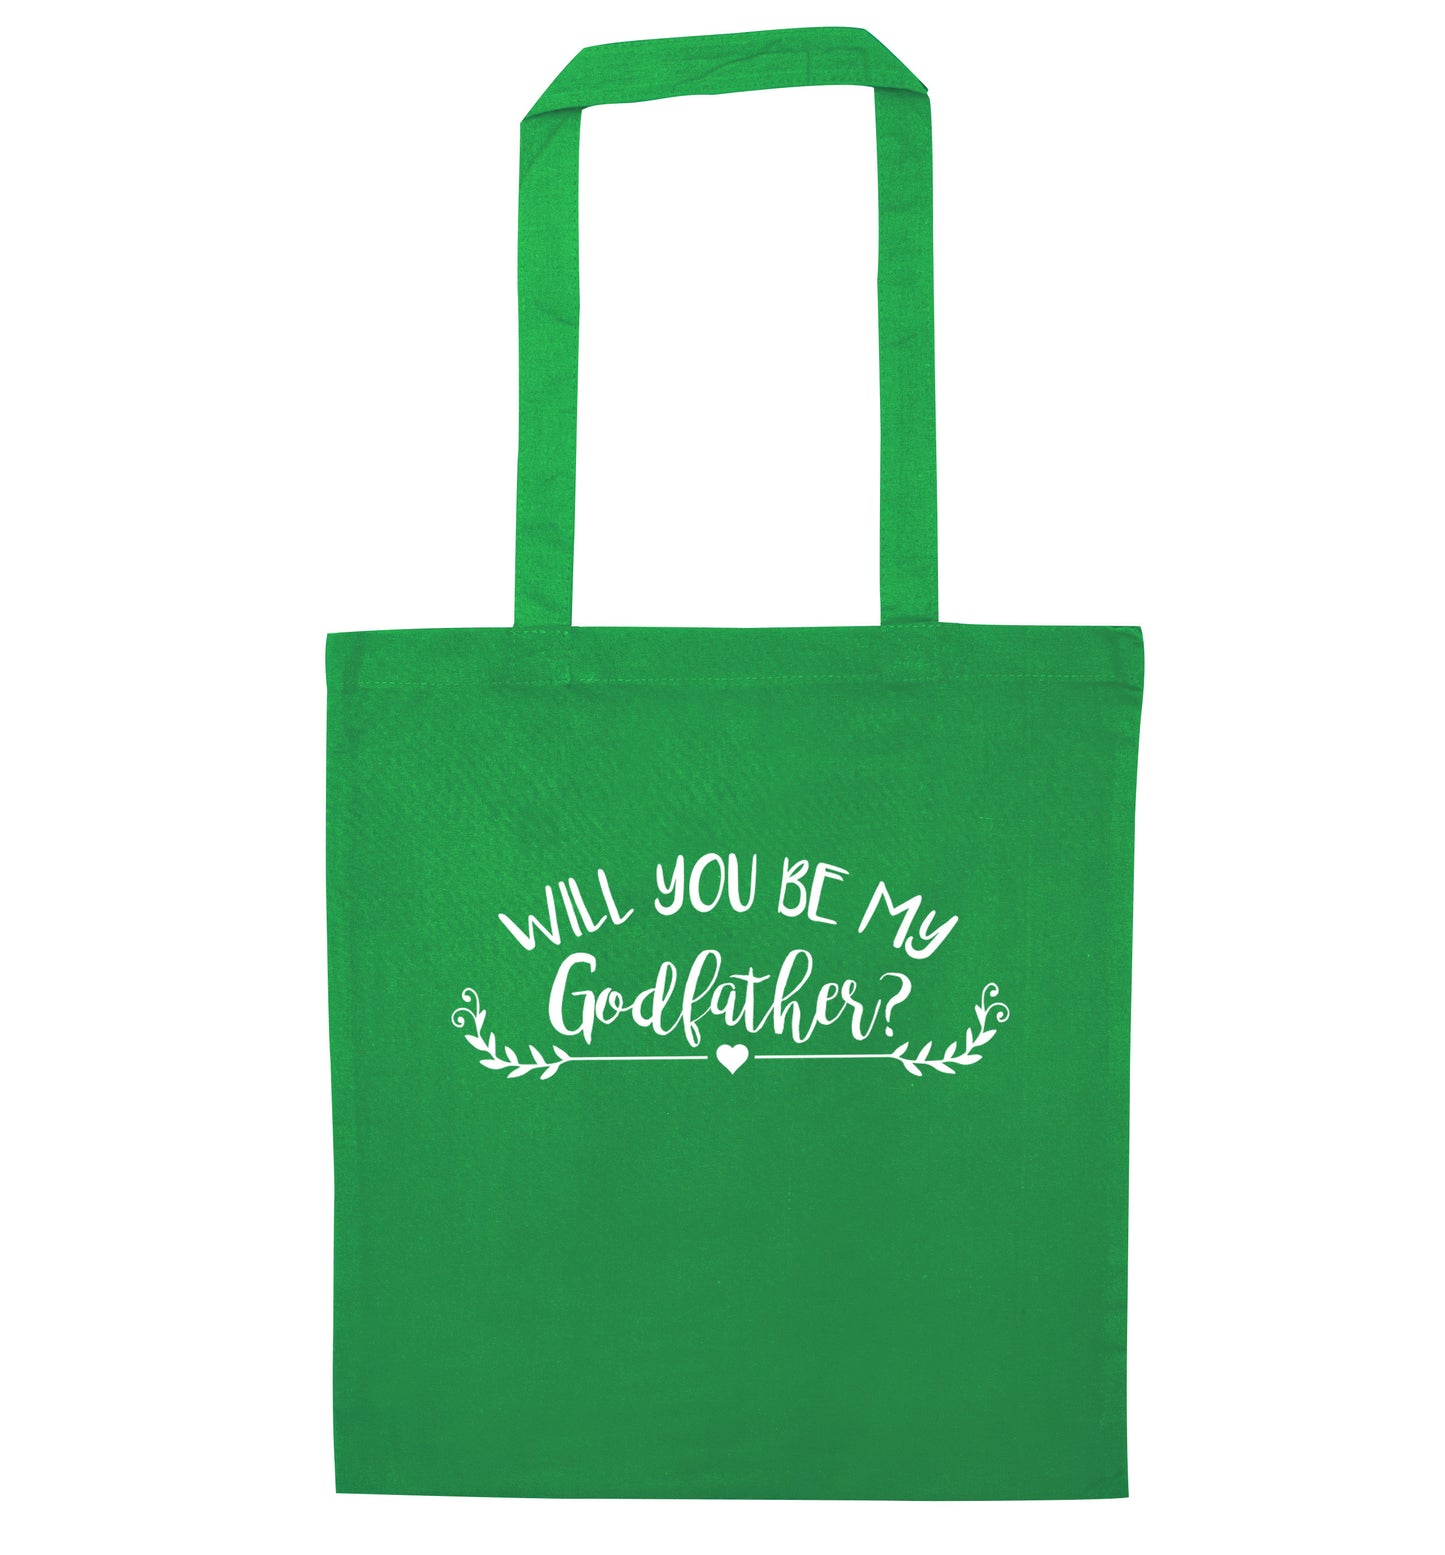 Will you be my godfather? green tote bag